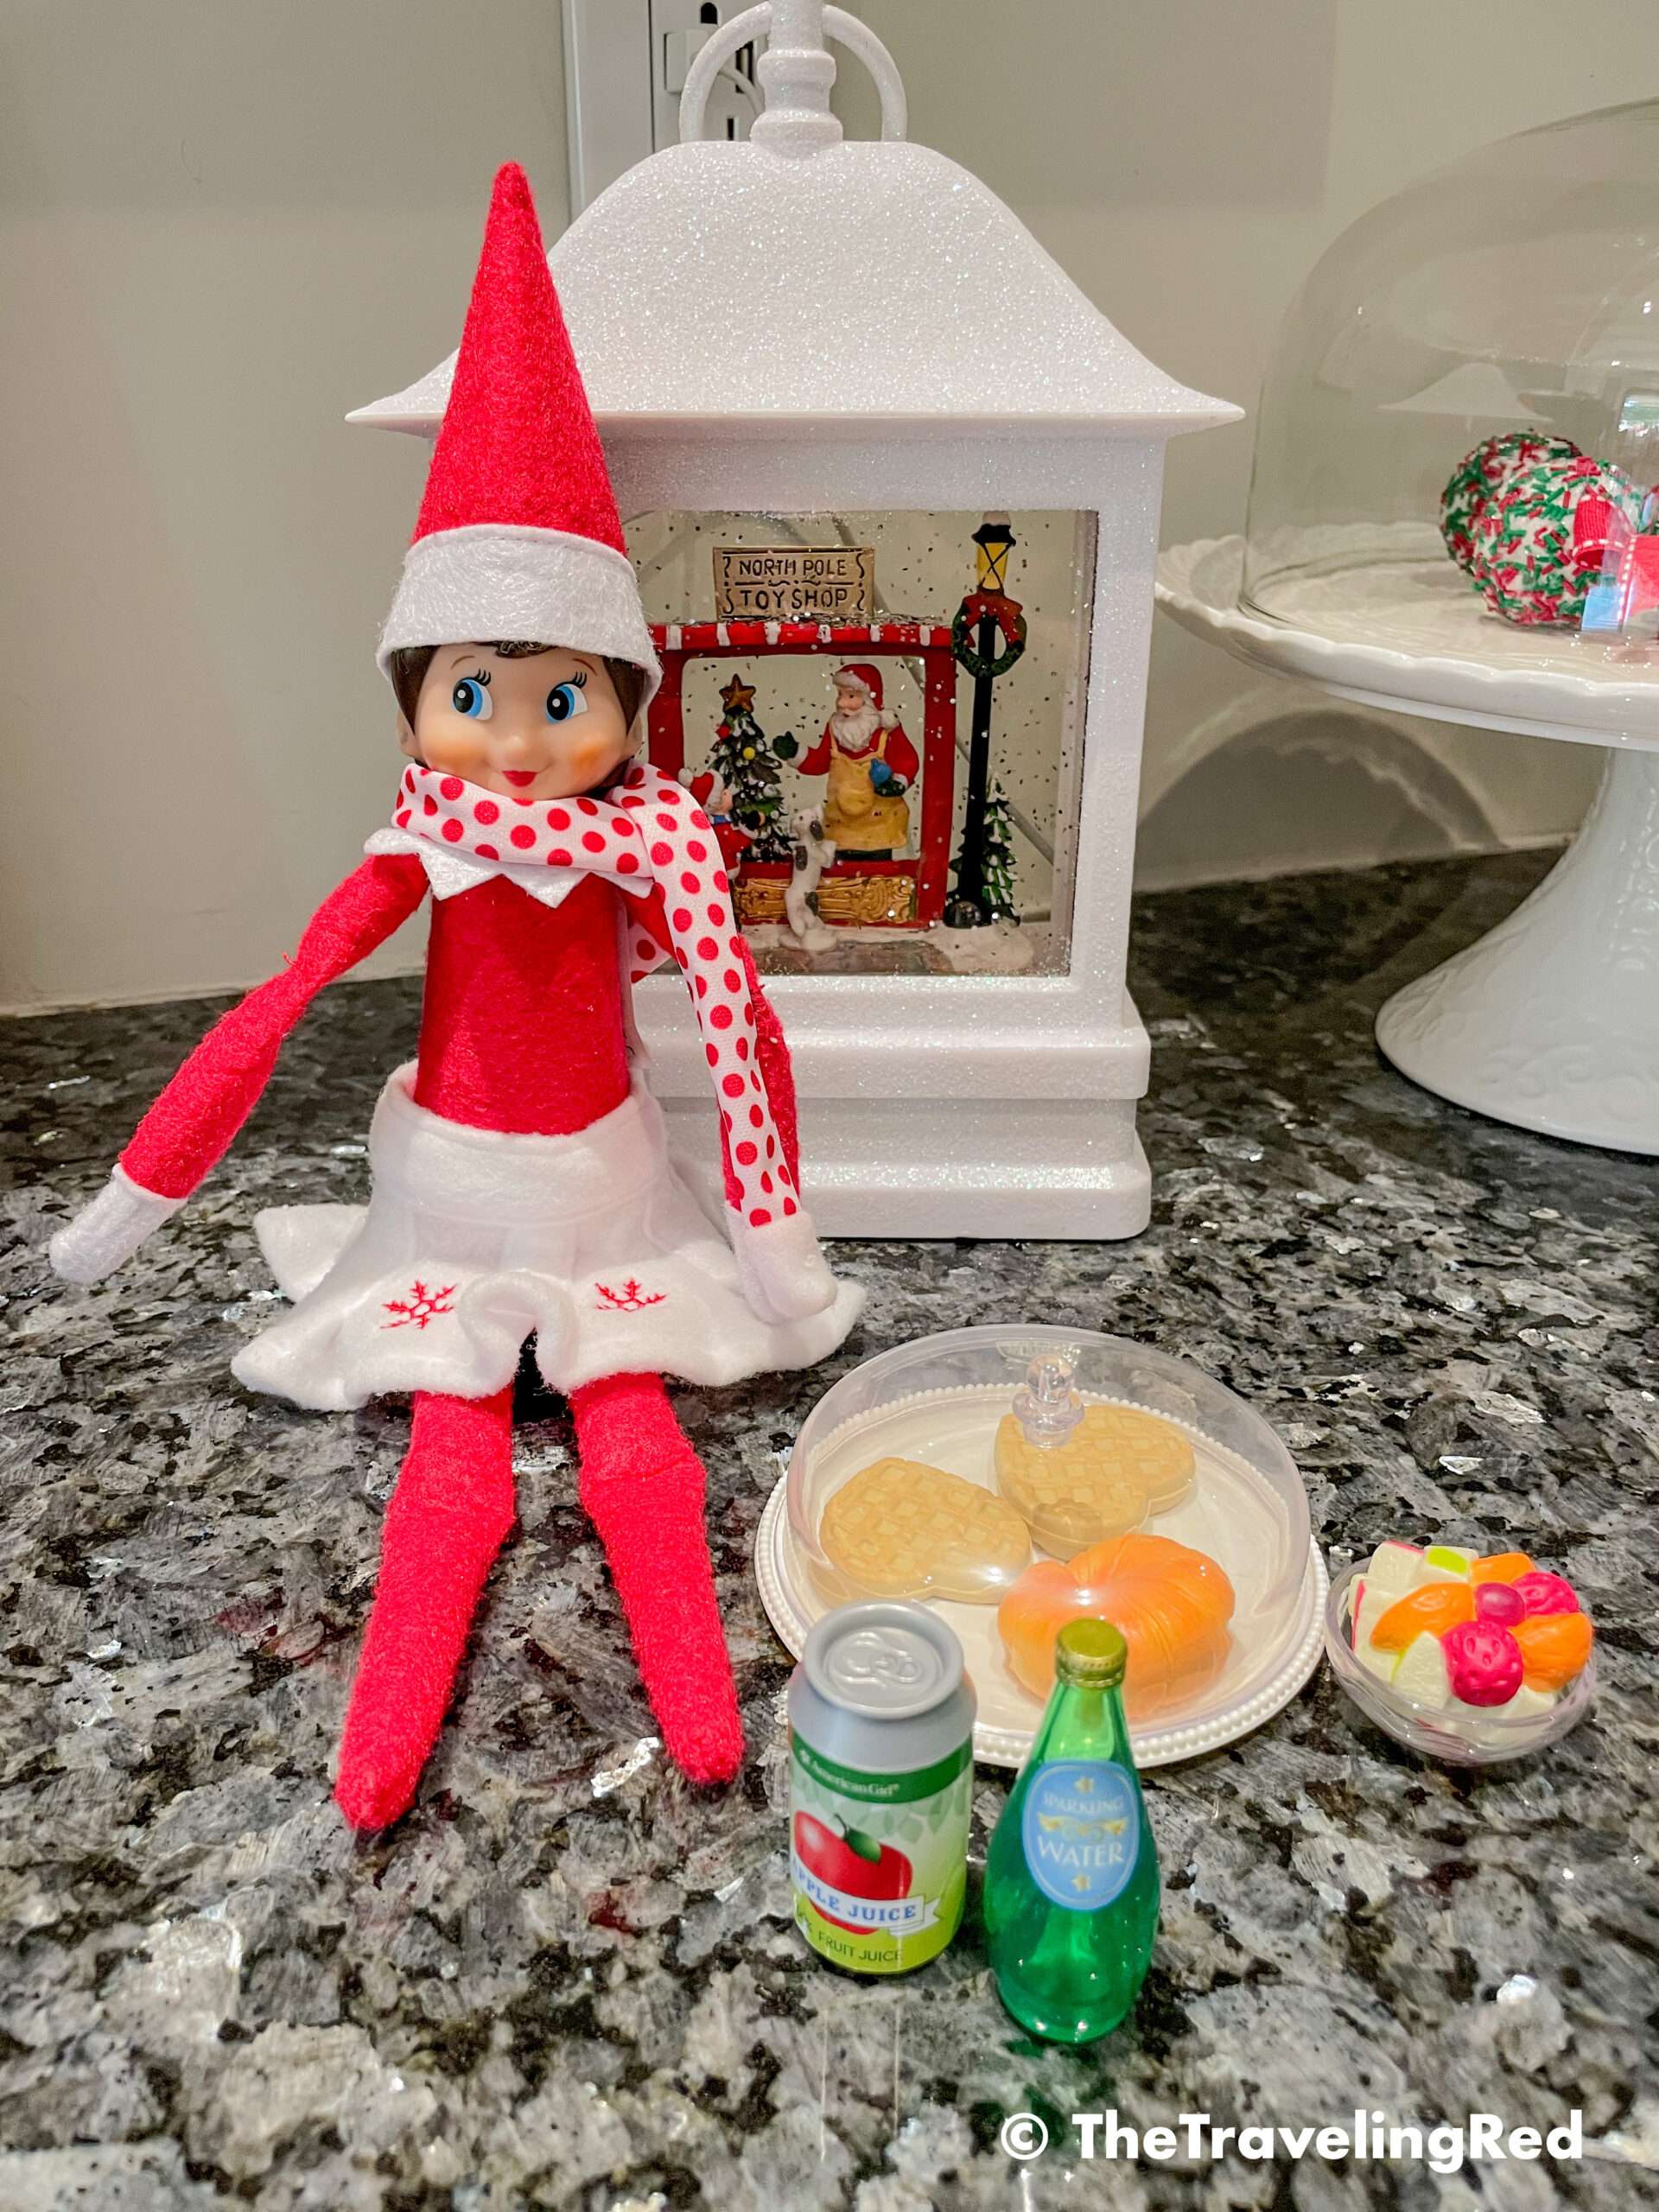 Naughty Elf on the shelf made herself a fancy breakfast using the pretend food from the American Girl Dolls set. She even put on a scarf for the occasion. Fun and easy elf on the shelf ideas for a naughty elf that are quick and easy using things you have at home.